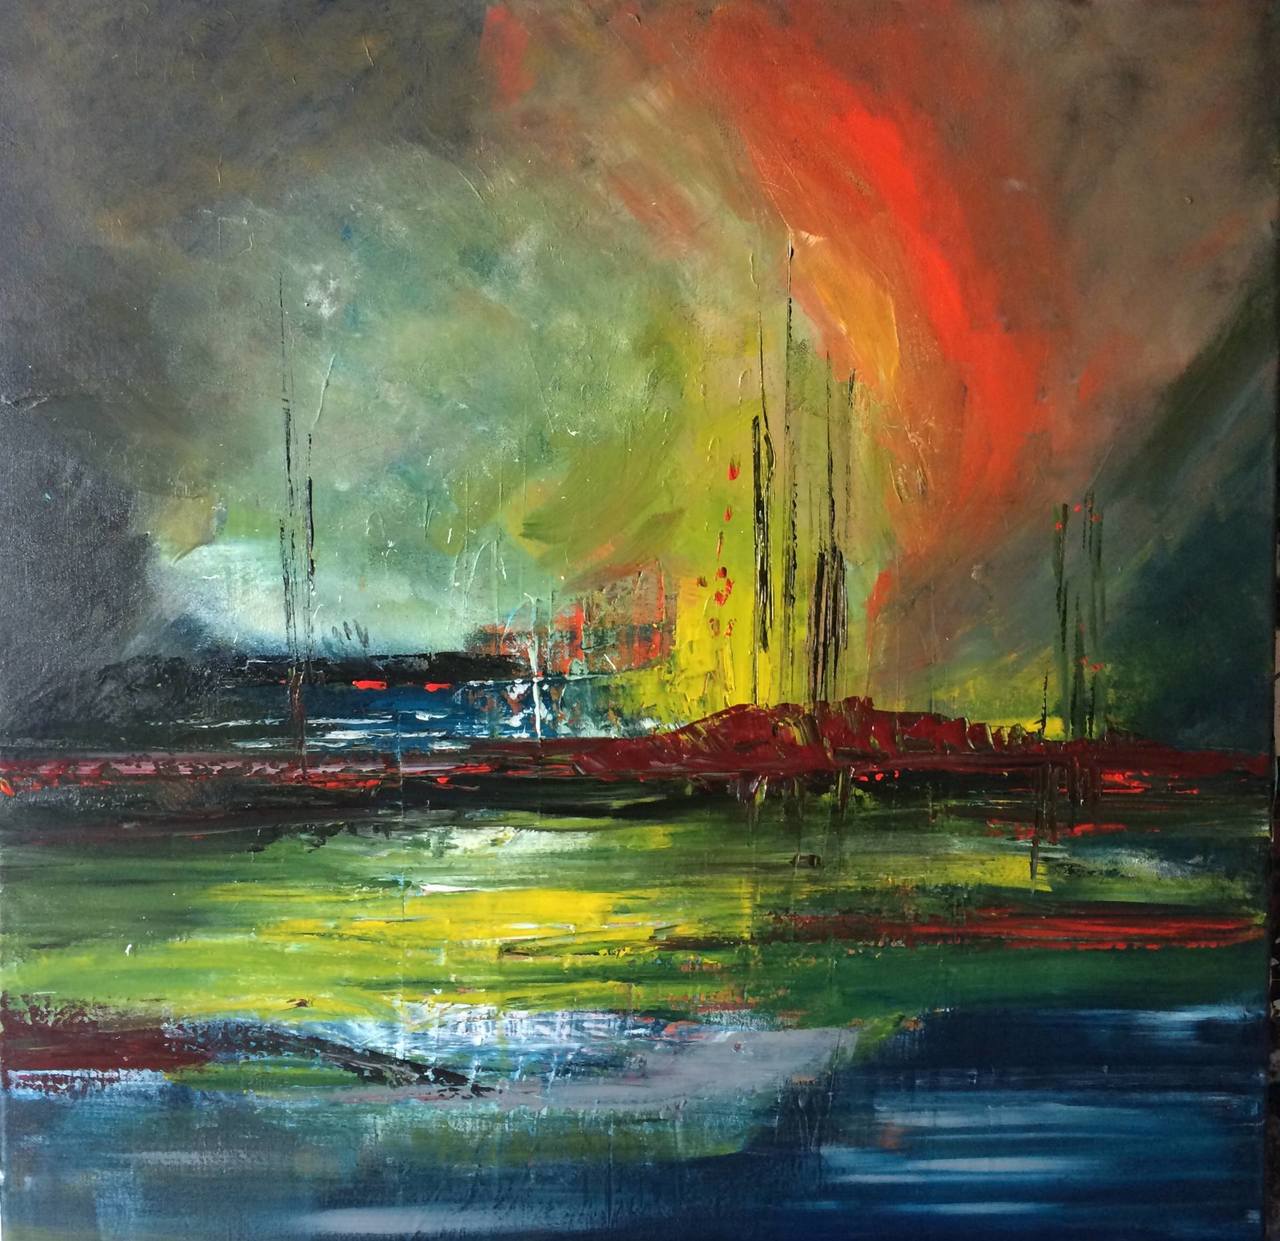 Other Worlds Part II by Mo Tuncay @SaatchiArt http://ow.ly/T5l1J #art #painting #LoveArt #FollowArt @paschamo https://t.co/1Kph11A4Xj